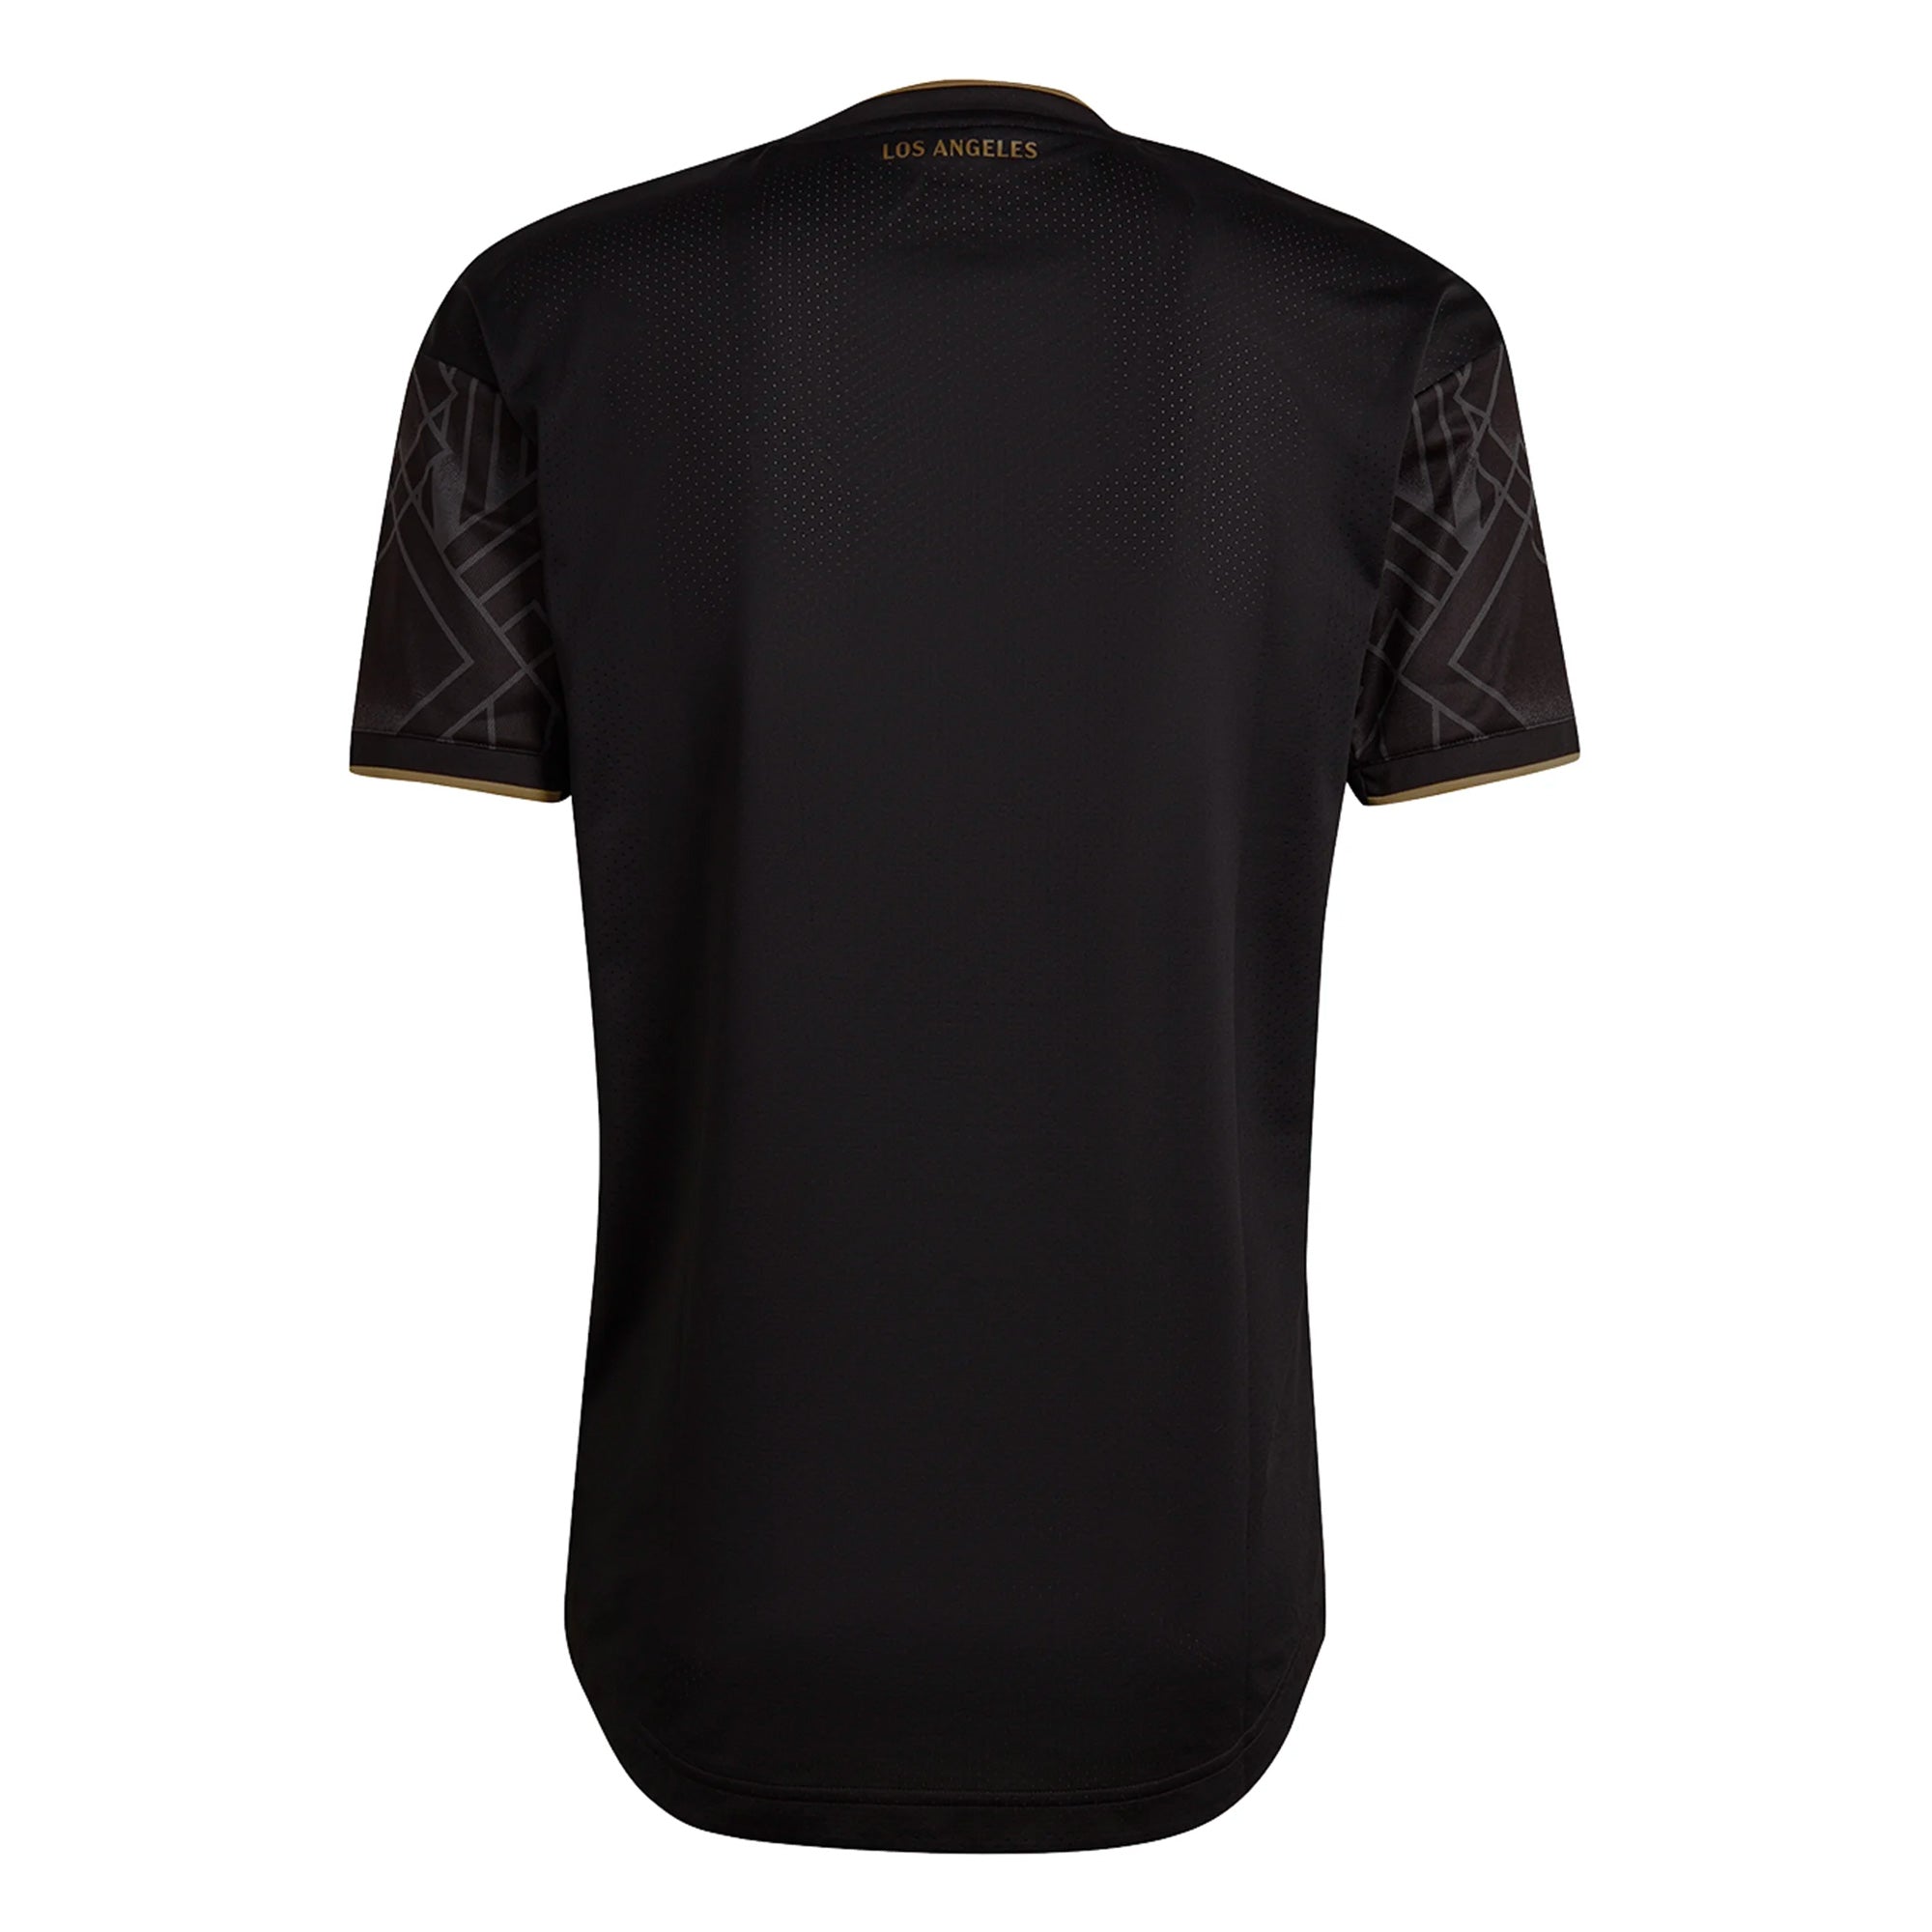 LAFC 22/23 Home Jersey